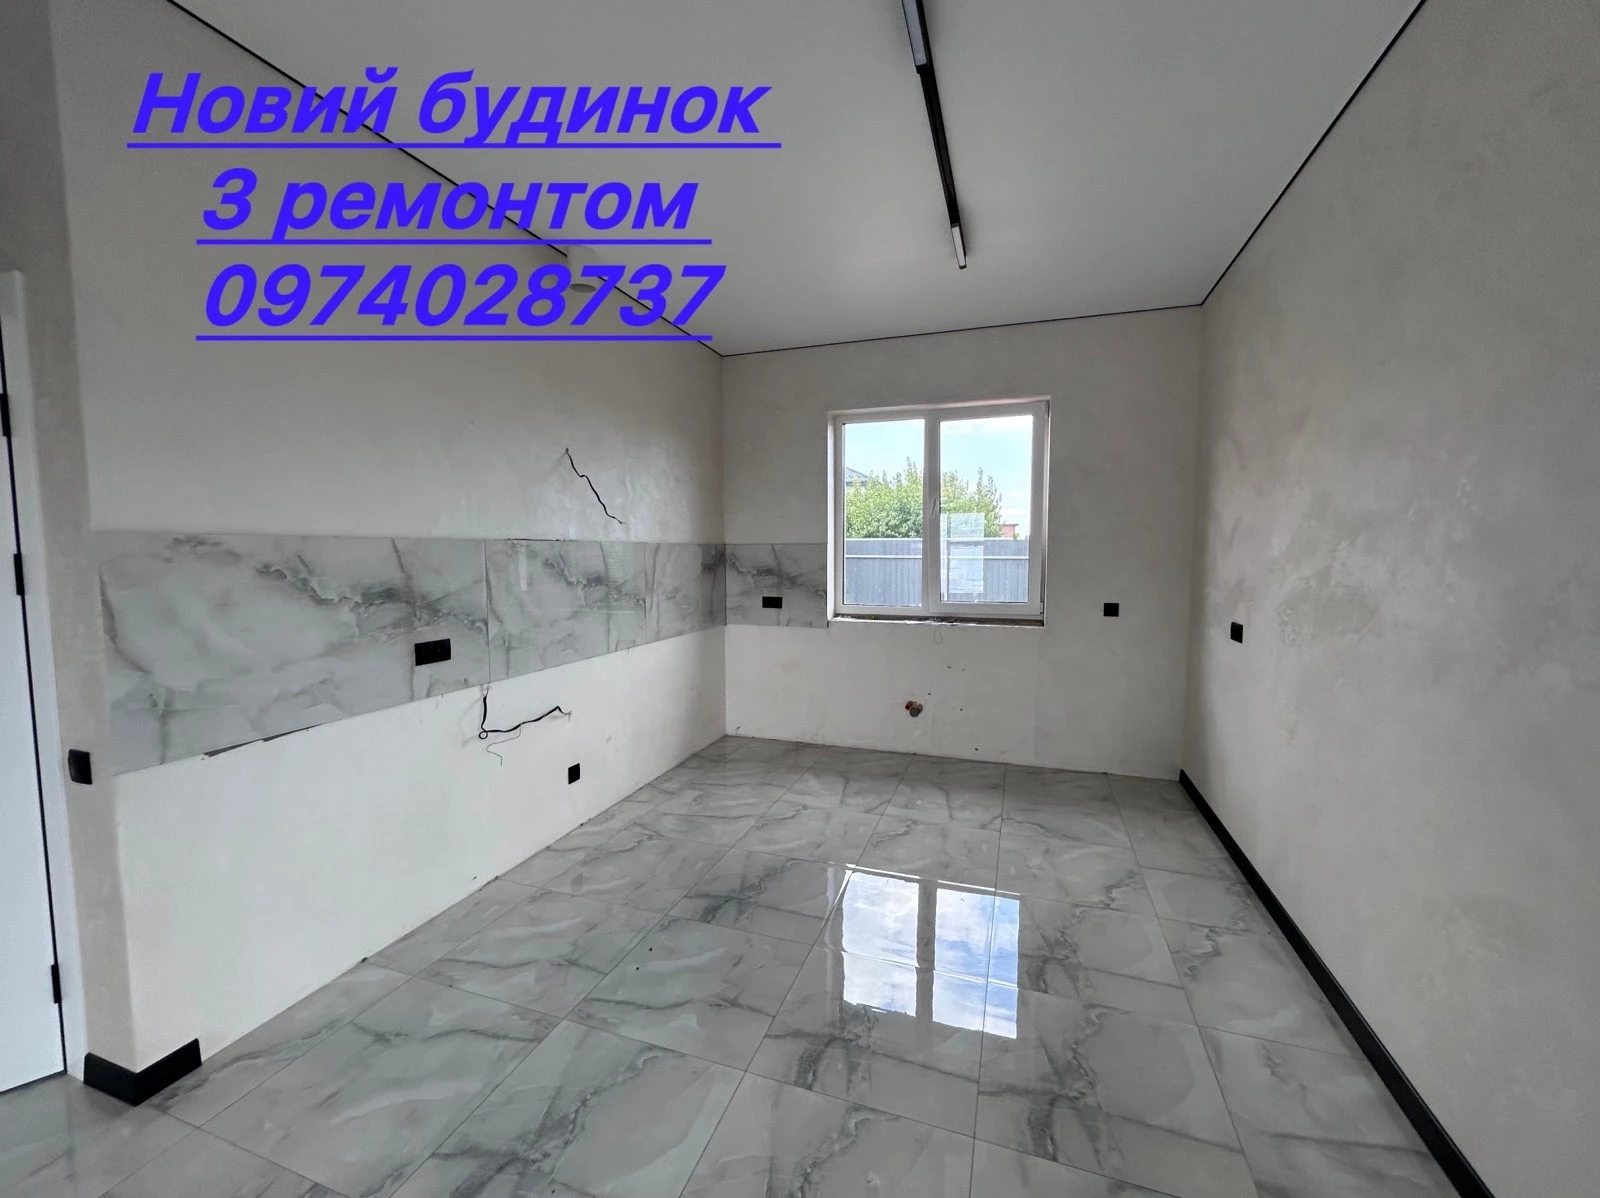 House for sale. 3 rooms, 105 m², 1 floor. Boryspil. 